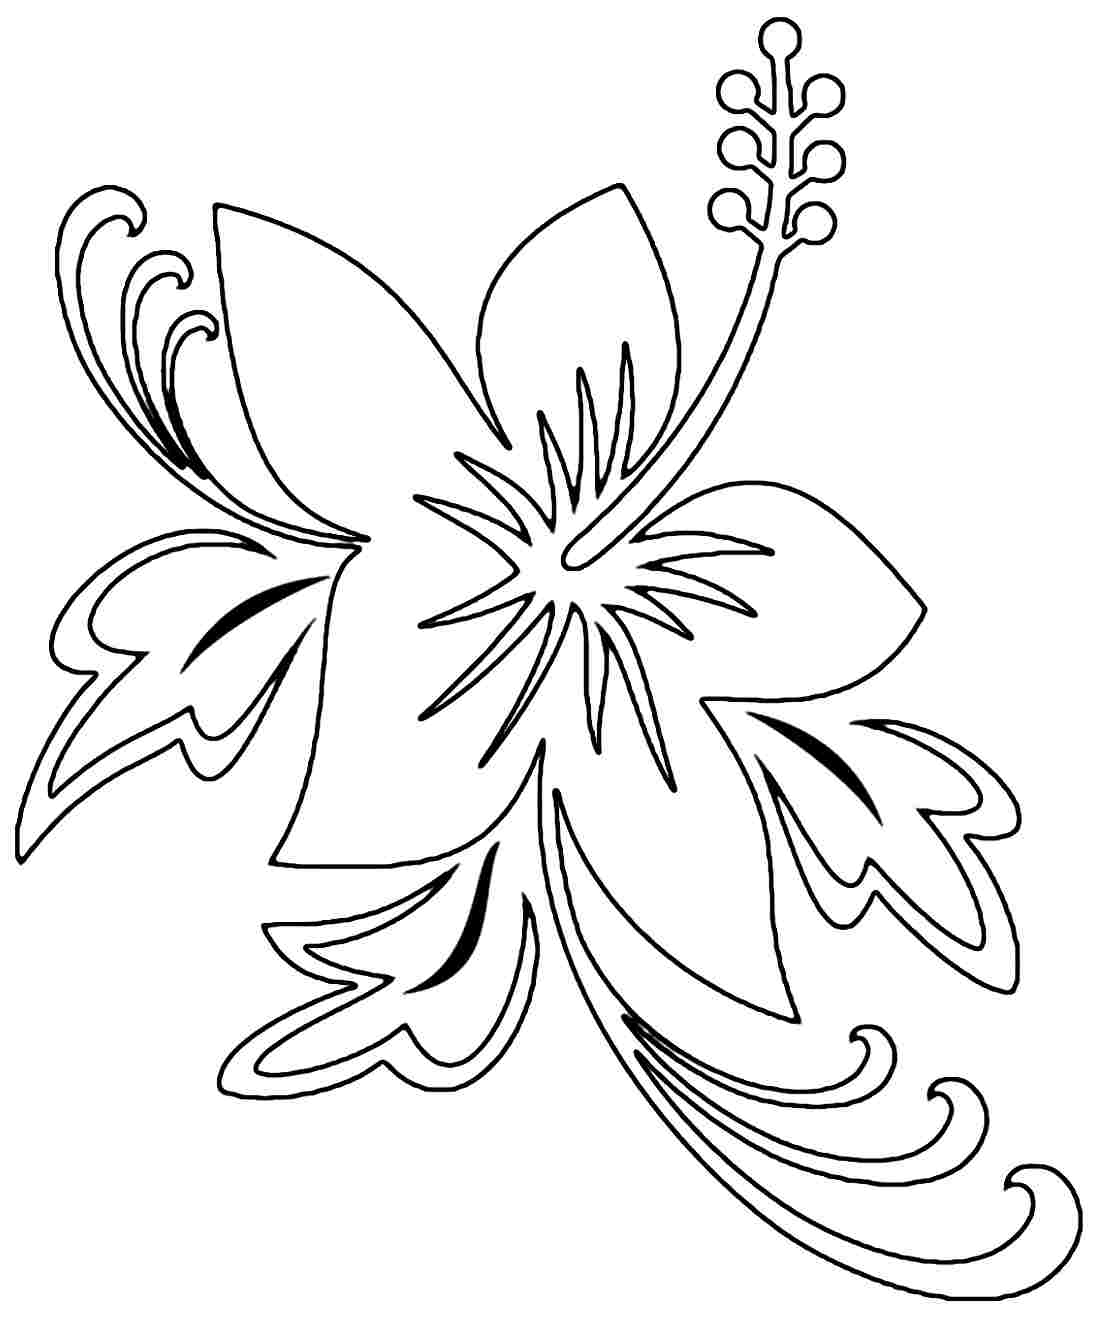 8 Best Images of Free Printable Hibiscus - Hibiscus Flower Outline ...